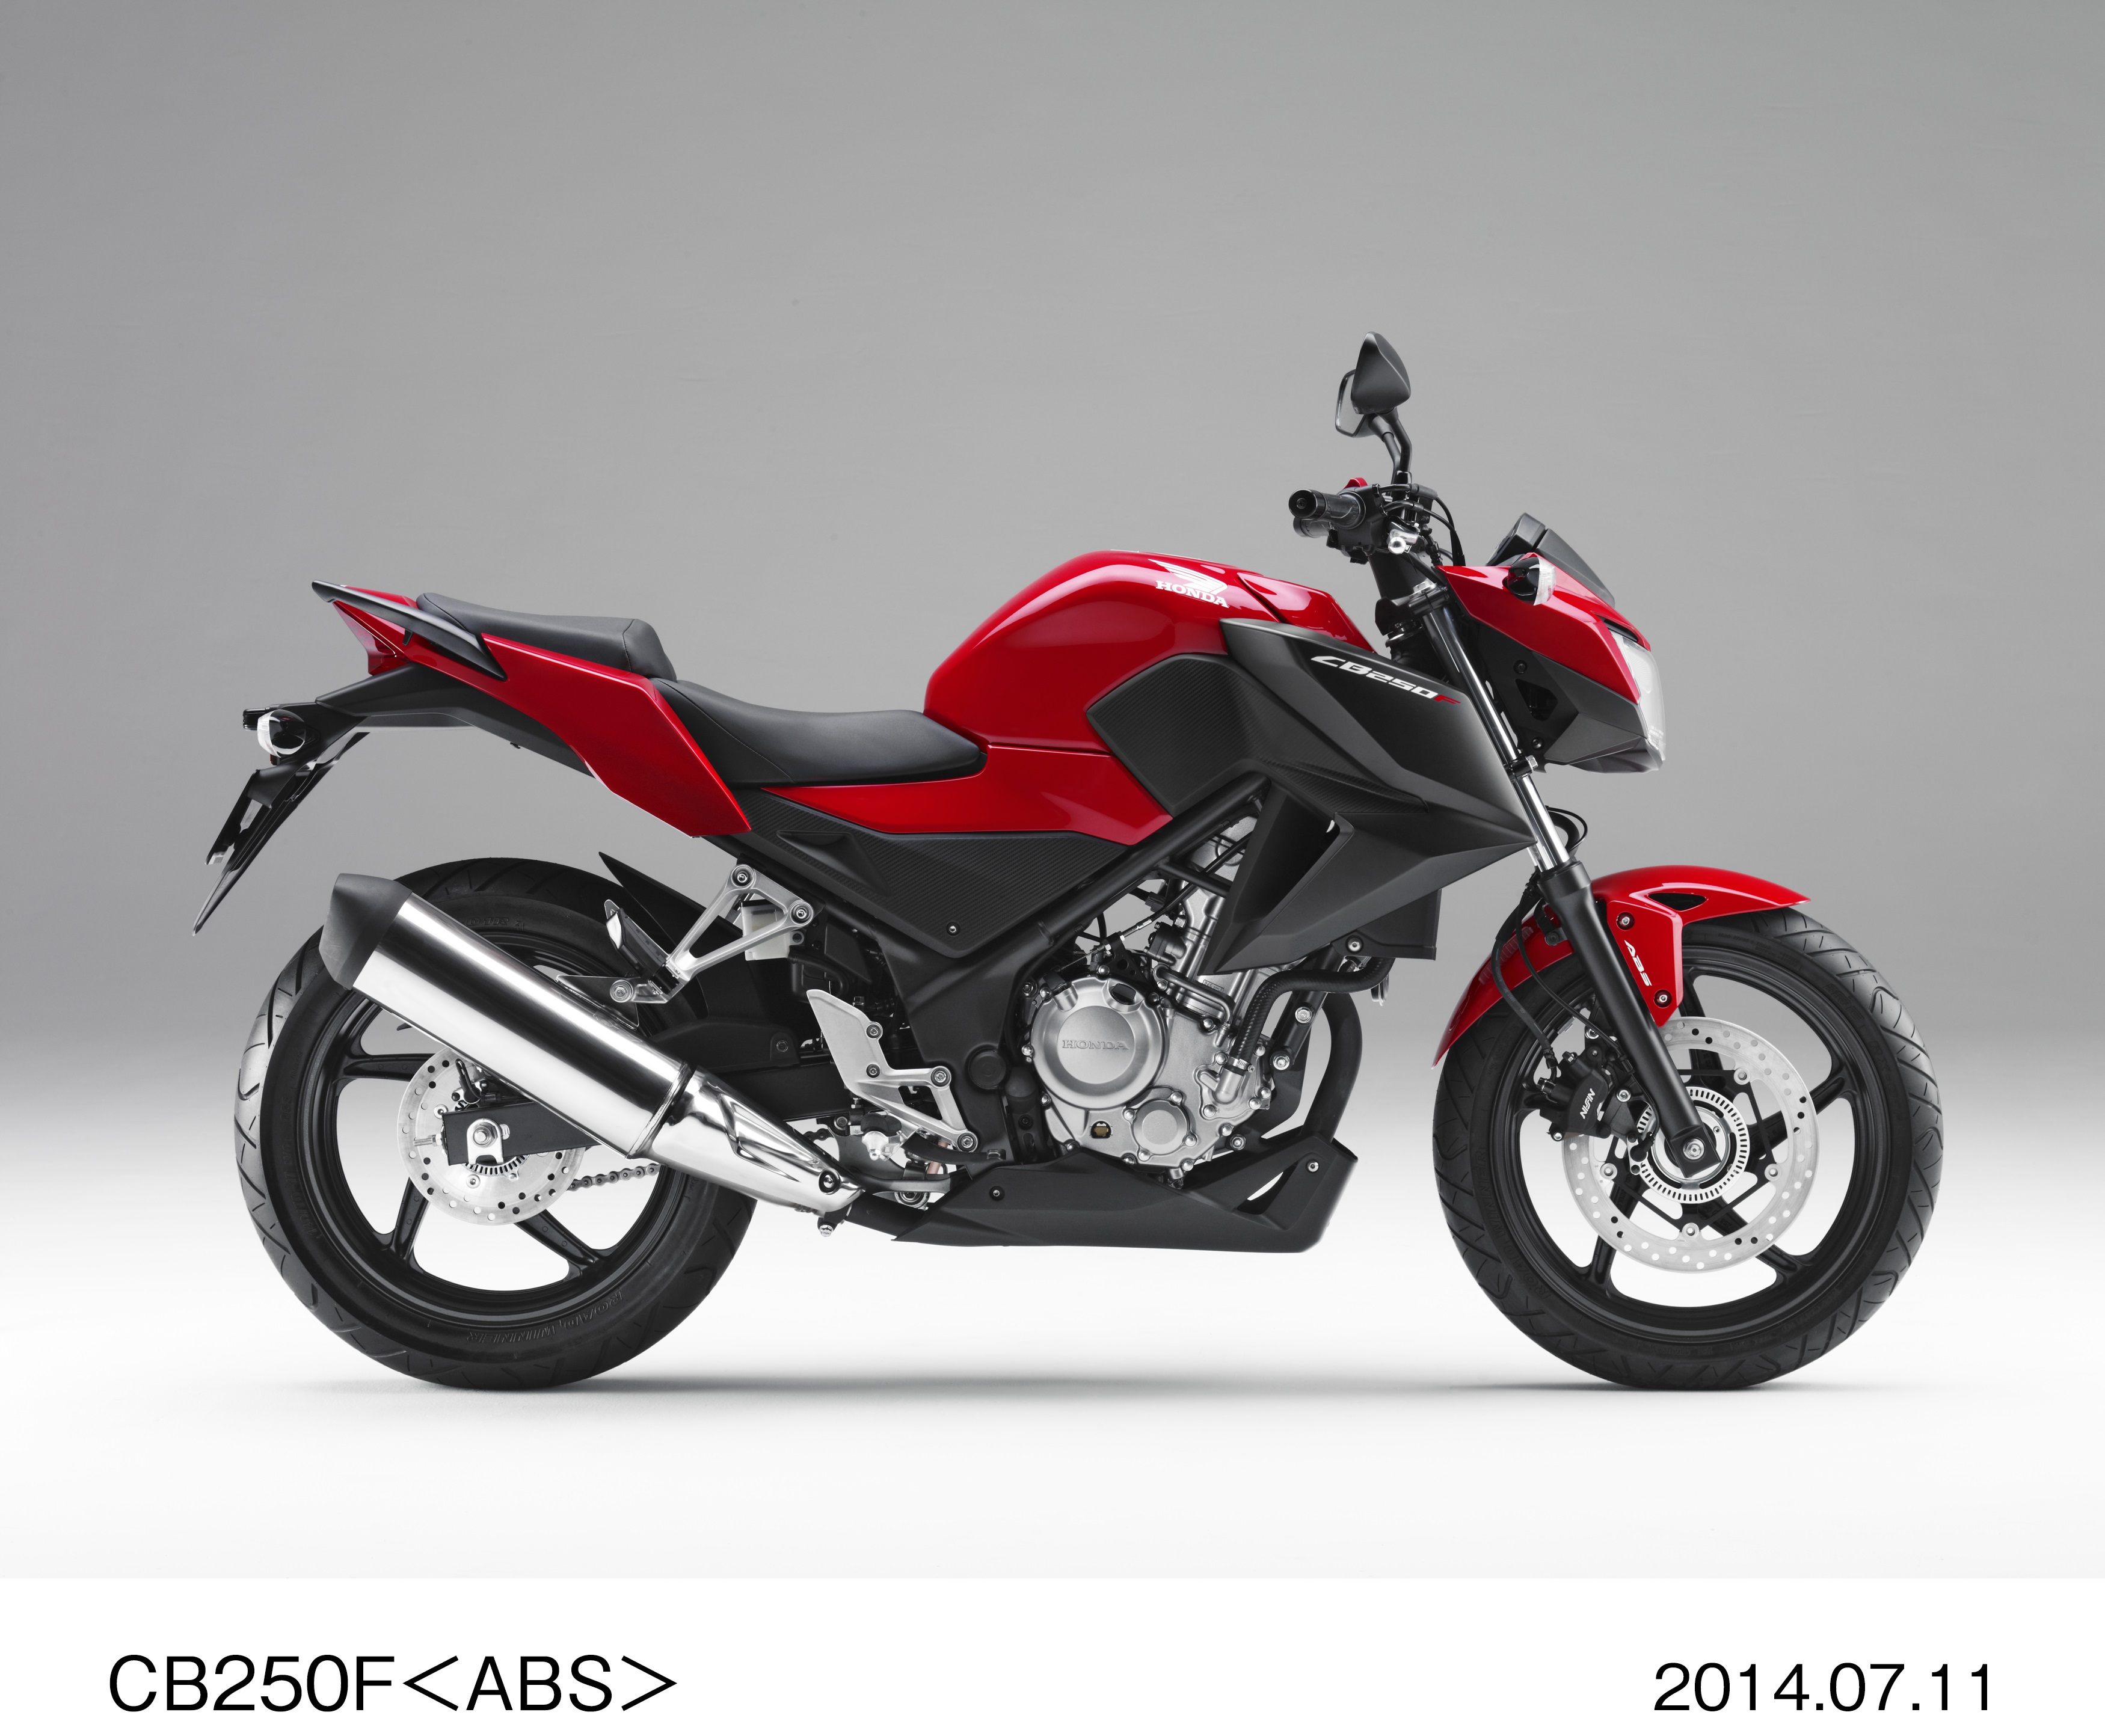 Honda CB300F: more pictures and details